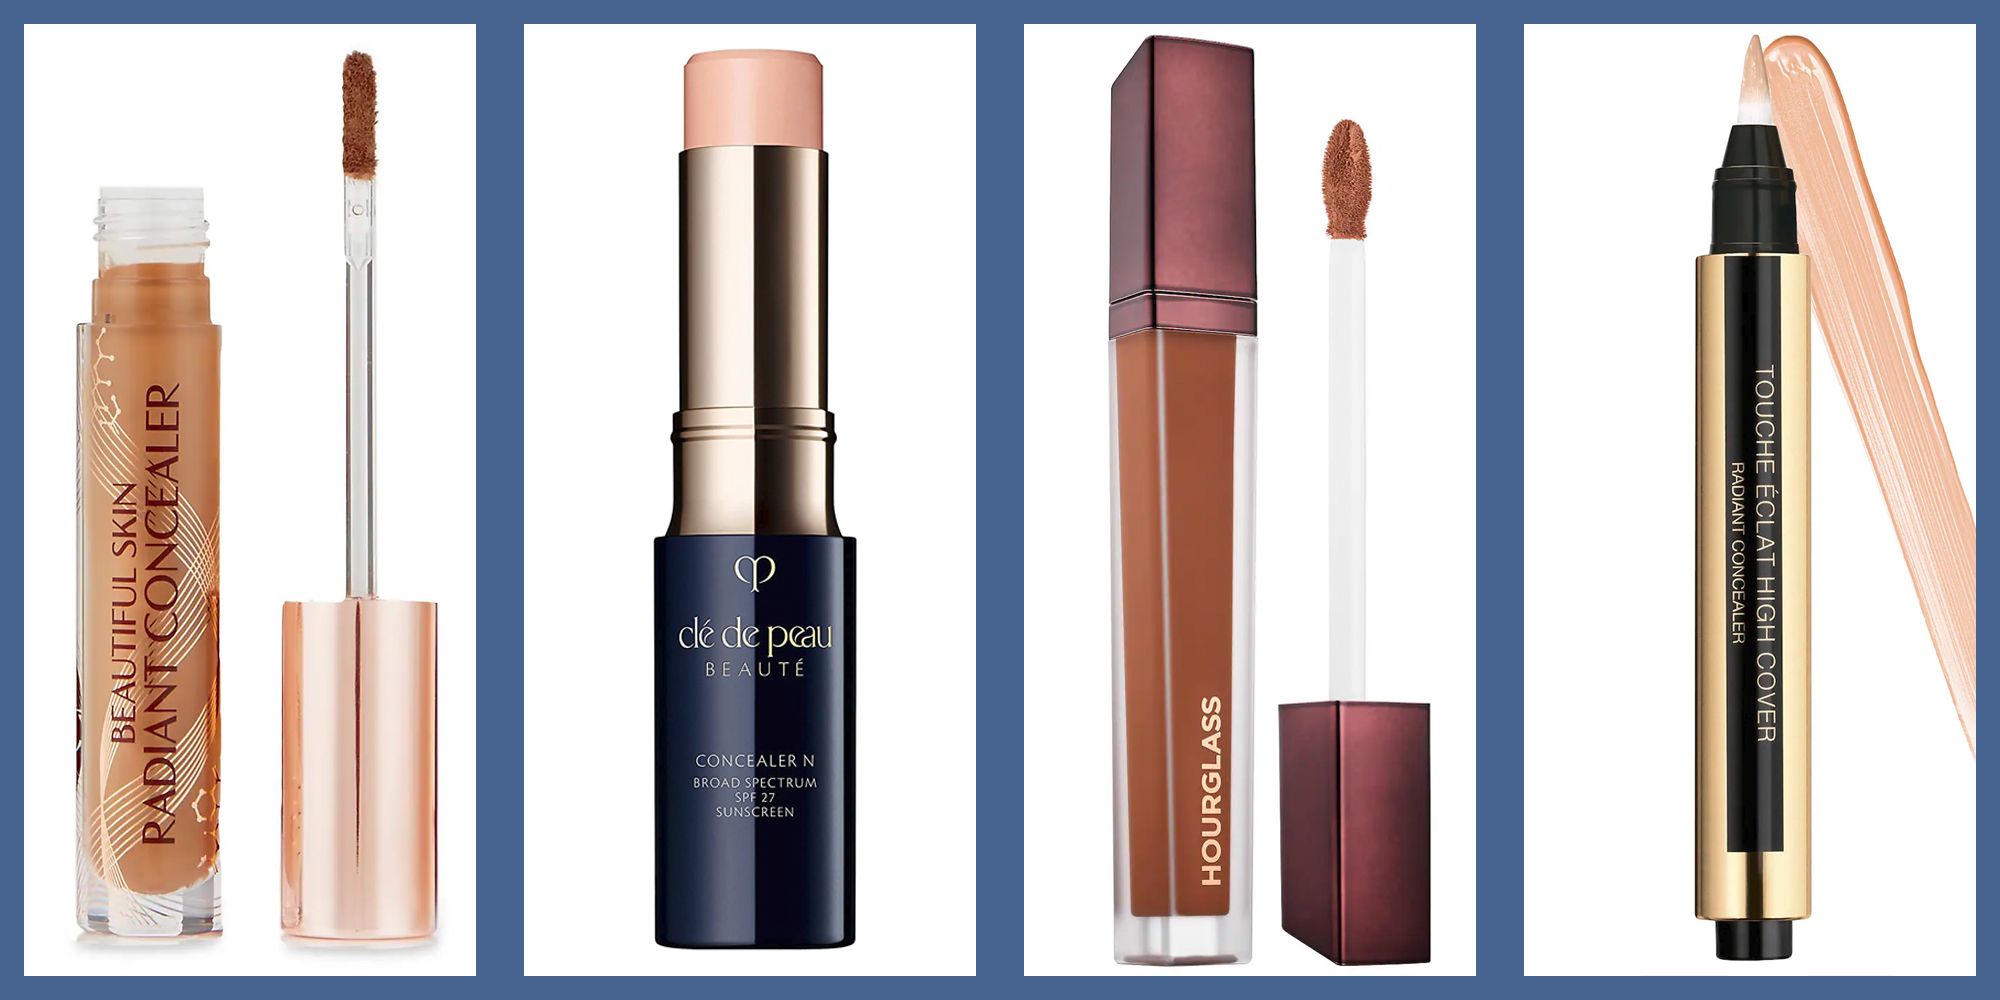 auroch Interconnect imperium 15 Best Concealers for Mature Skin, According to Experts 2023